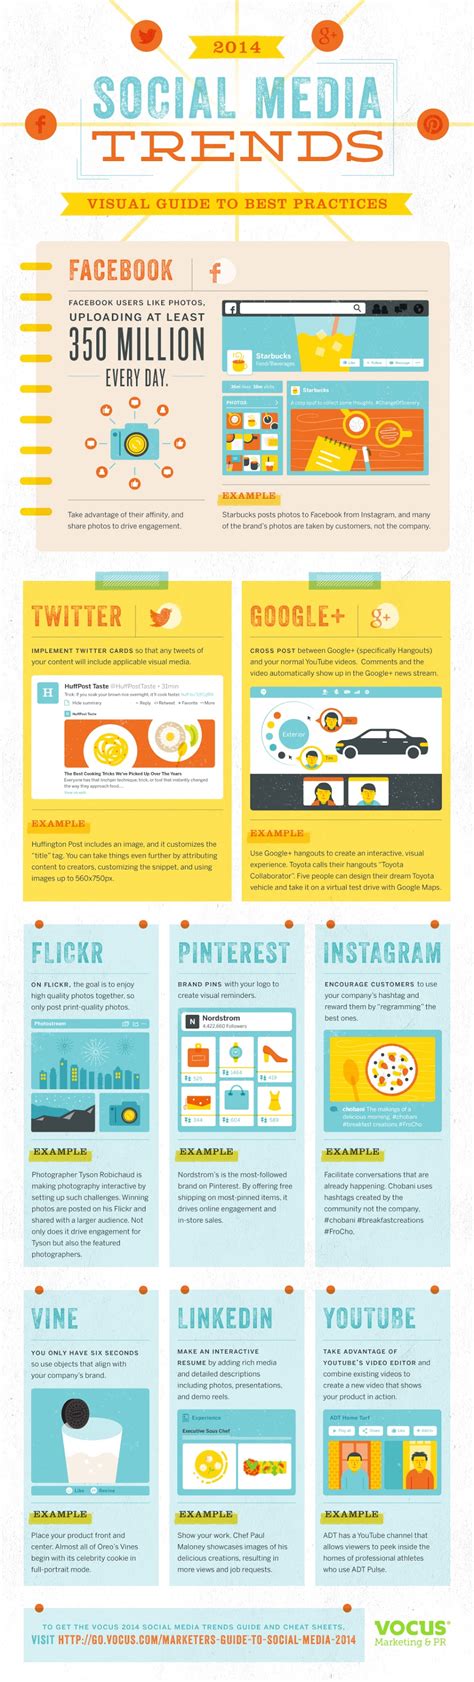 Social Media Marketing Trends And Best Practices 2014 Infographic